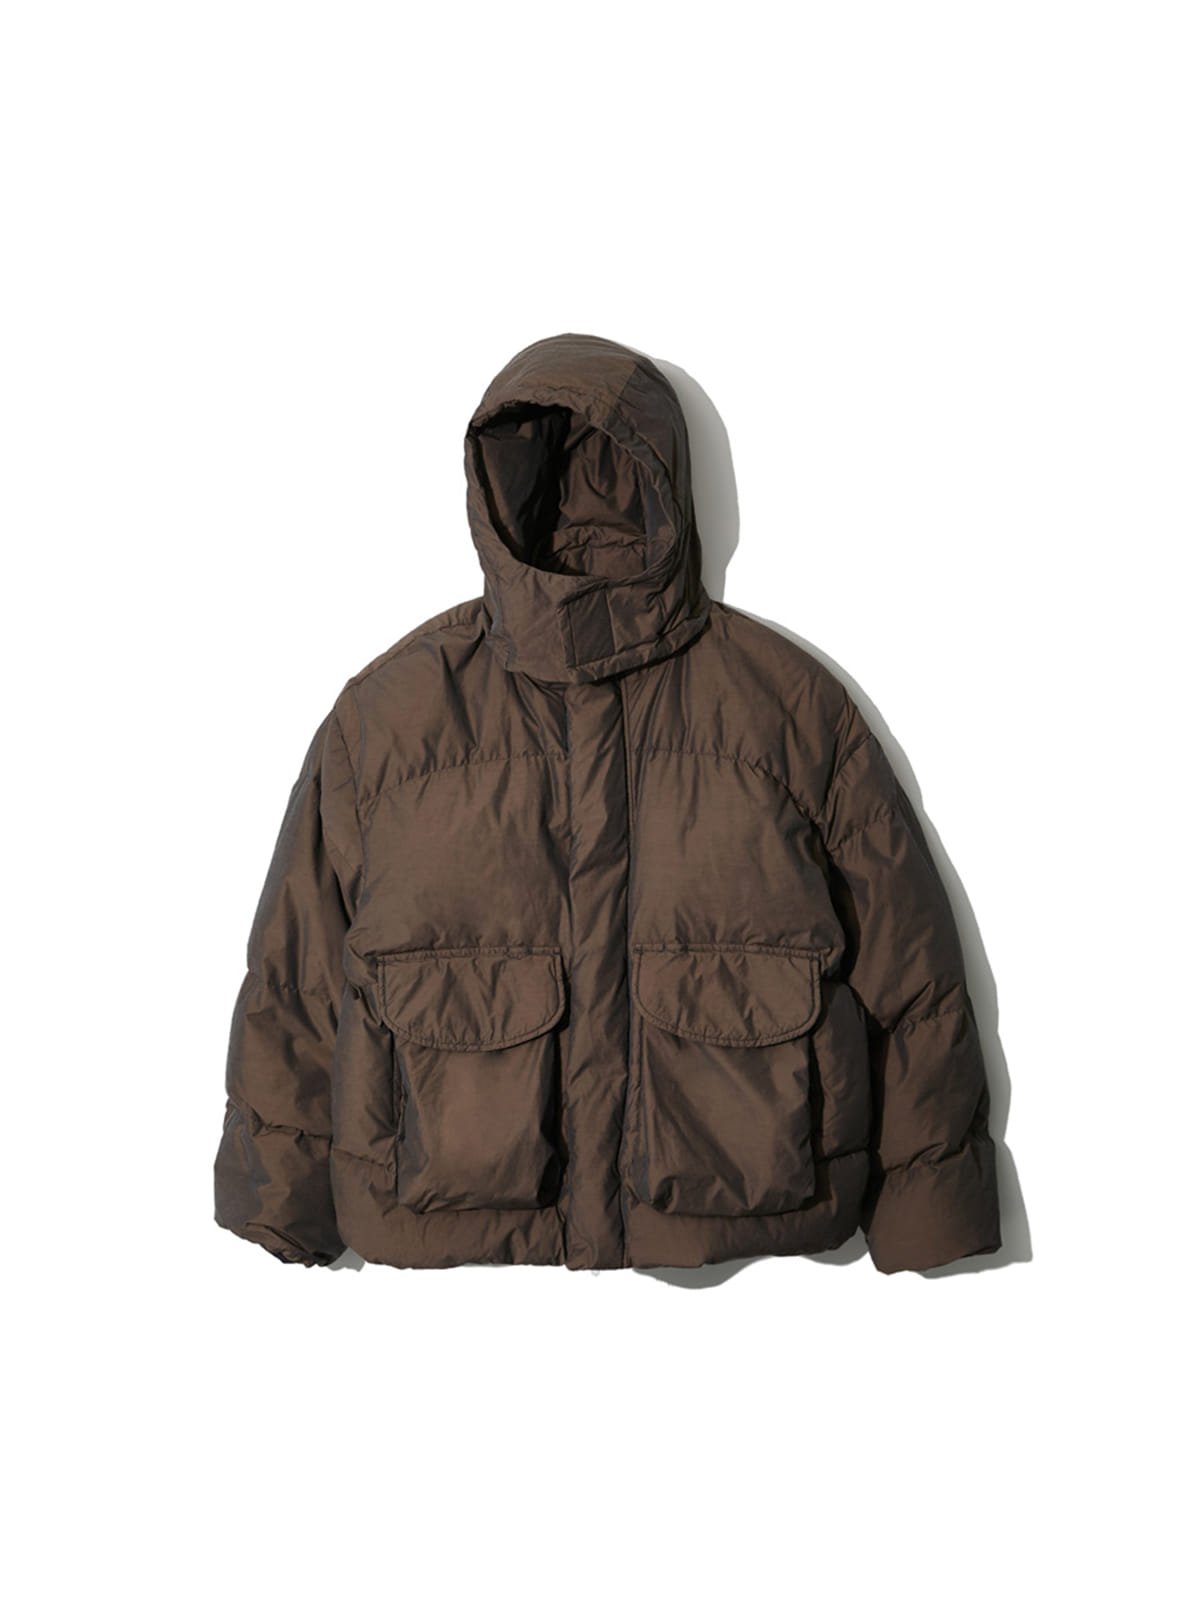 DISCOLORED GOOSE DOWN DETACHABLE HOODED JACKET (BROWN)